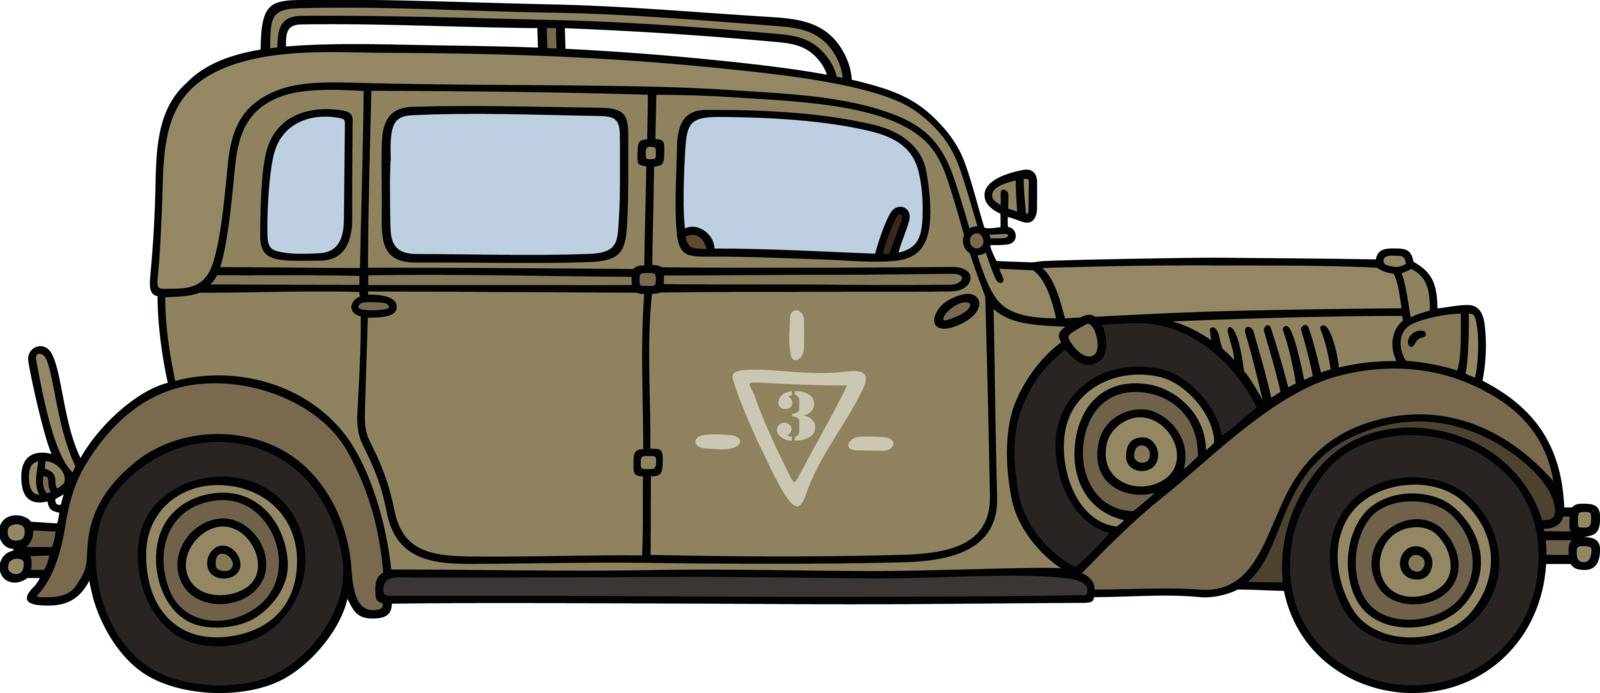 Hand drawing of a vintage sand military officers vehicle